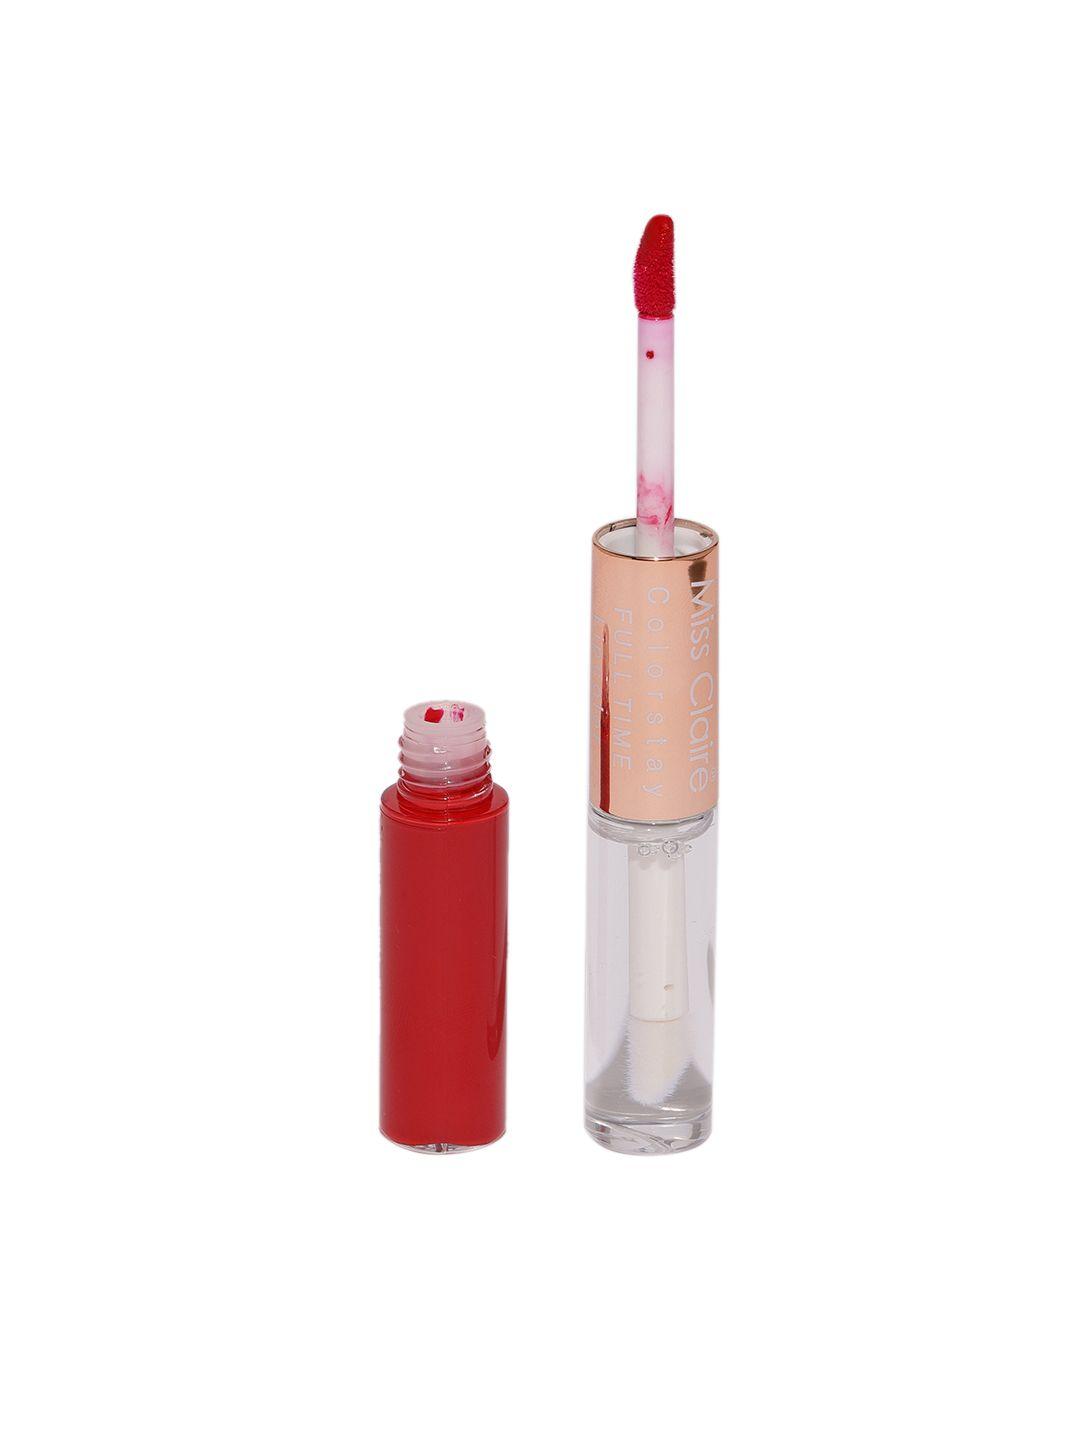 miss-claire-1-colorstay-full-time-lipcolor-10ml